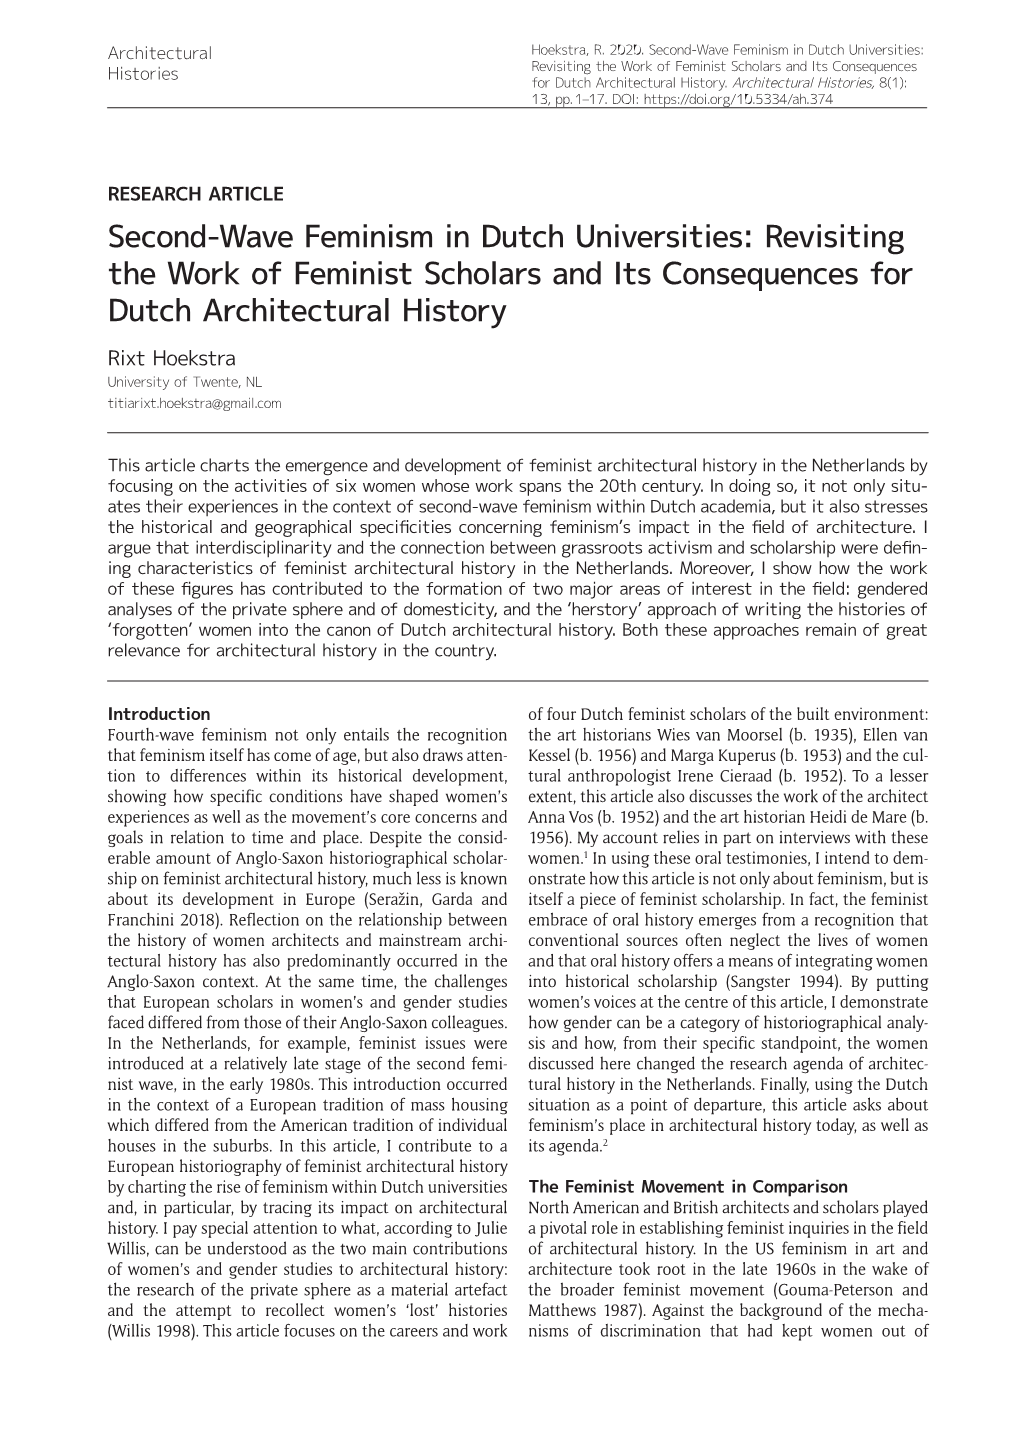 Second-Wave Feminism in Dutch Universities: Revisiting the Work of Feminist Scholars and Its Consequences +LVWRULHV for Dutch Architectural History